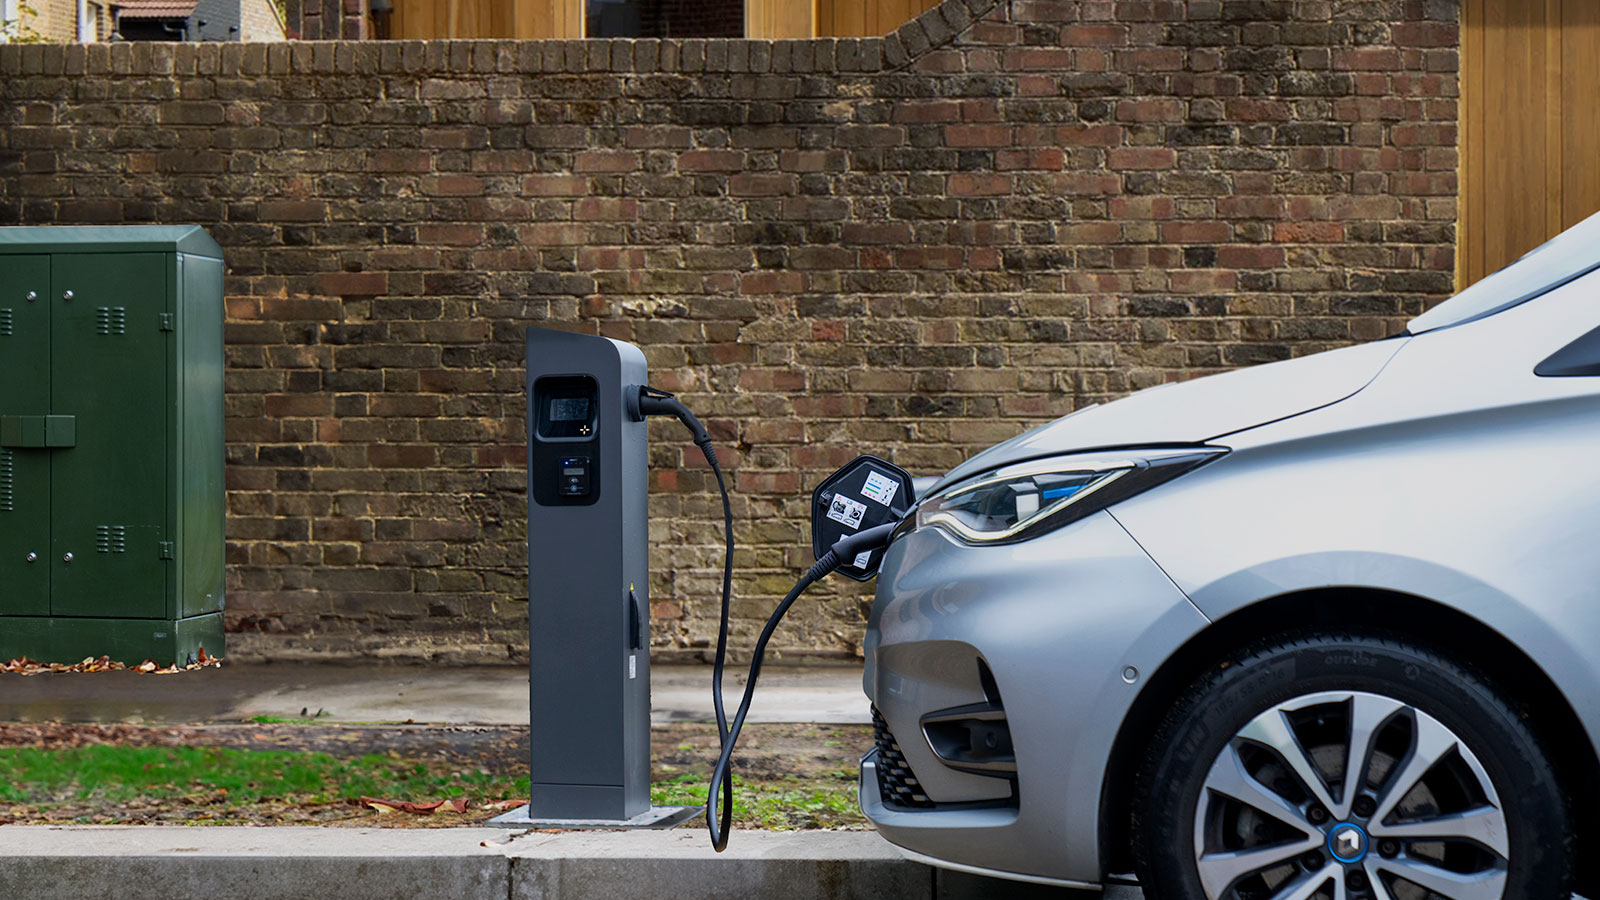 BT launches EV charging pilot using repurposed street cabinets